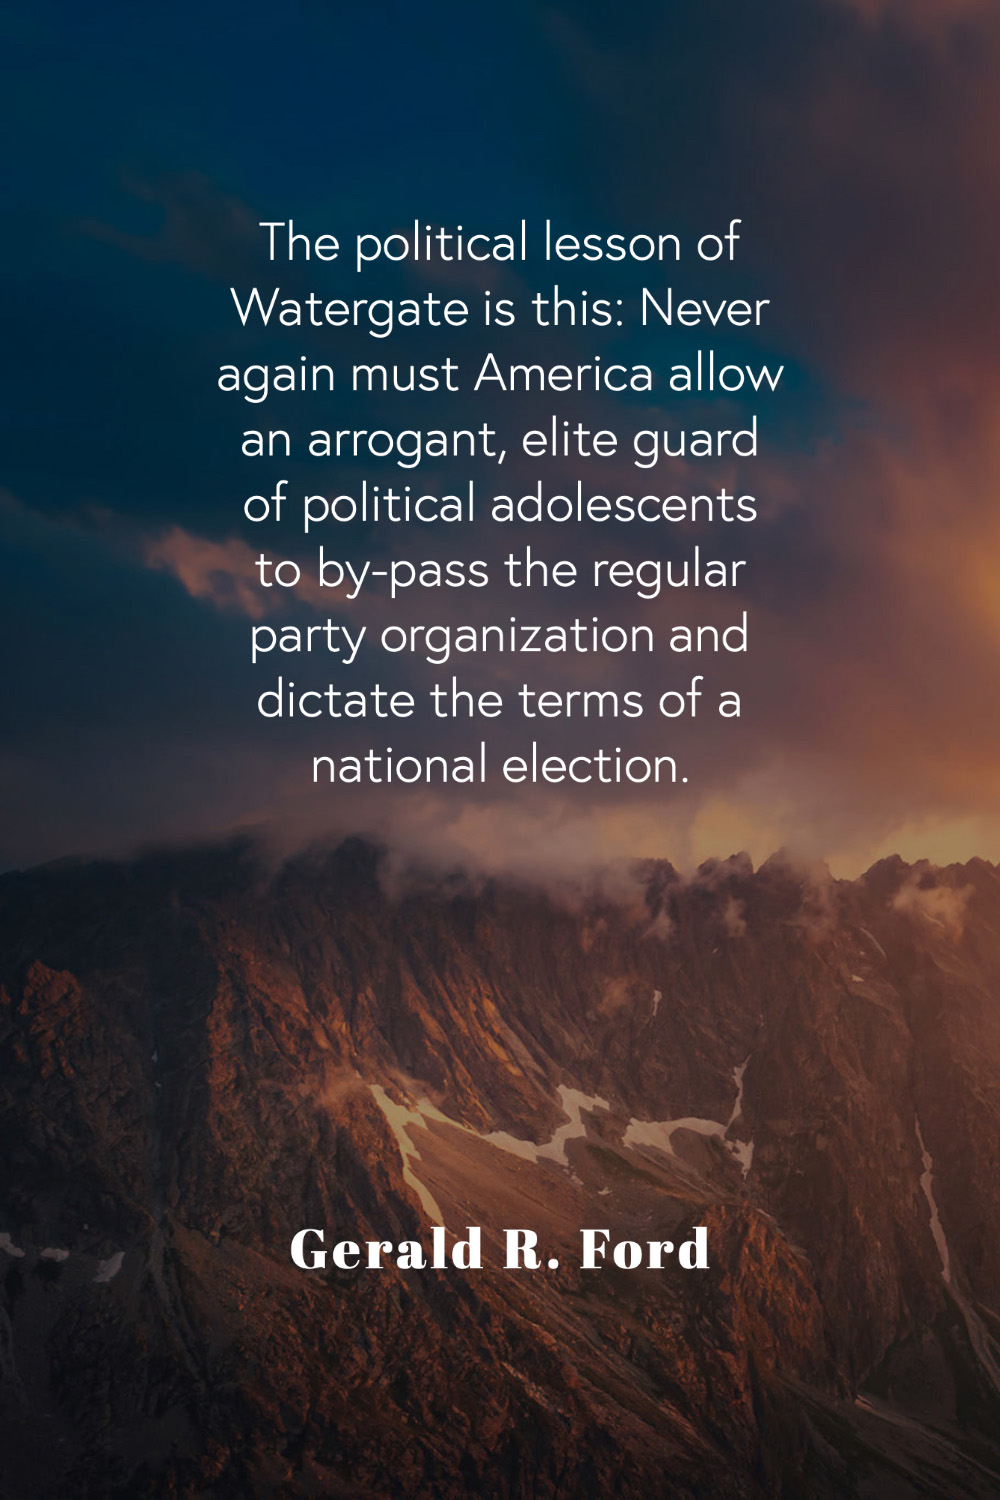 Quote by Gerald R. Ford